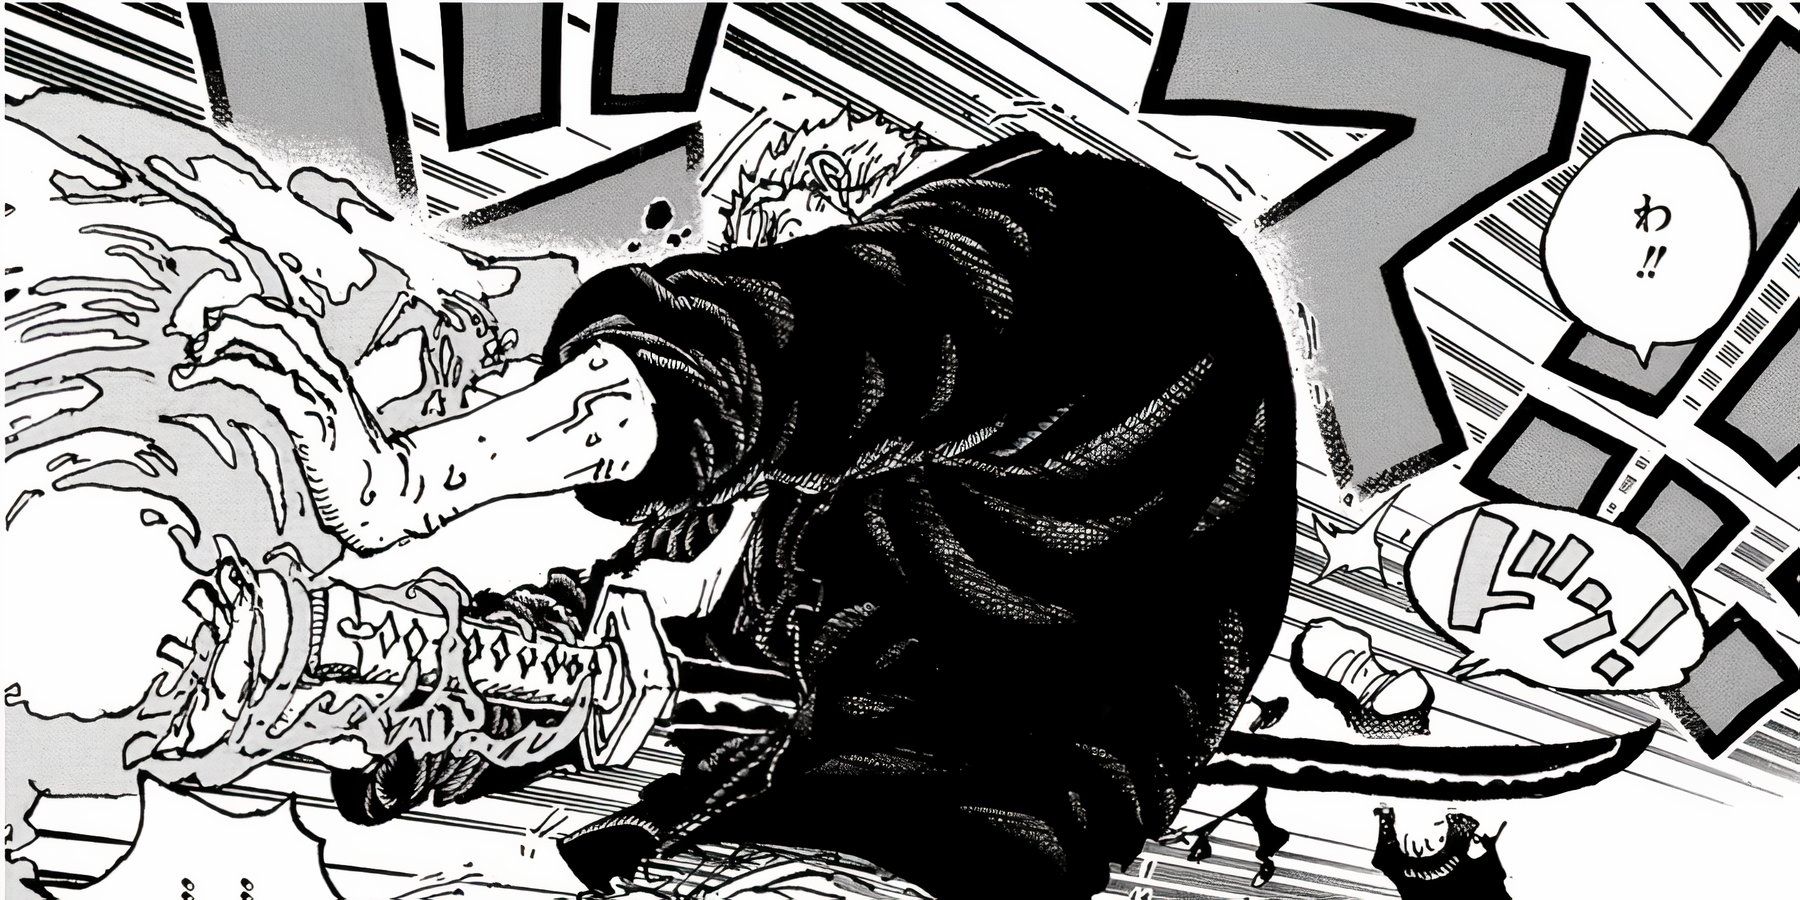 Shiryu uses the Clear-Clear Fruit to stab Vice Admiral Garp in the One Piece manga.